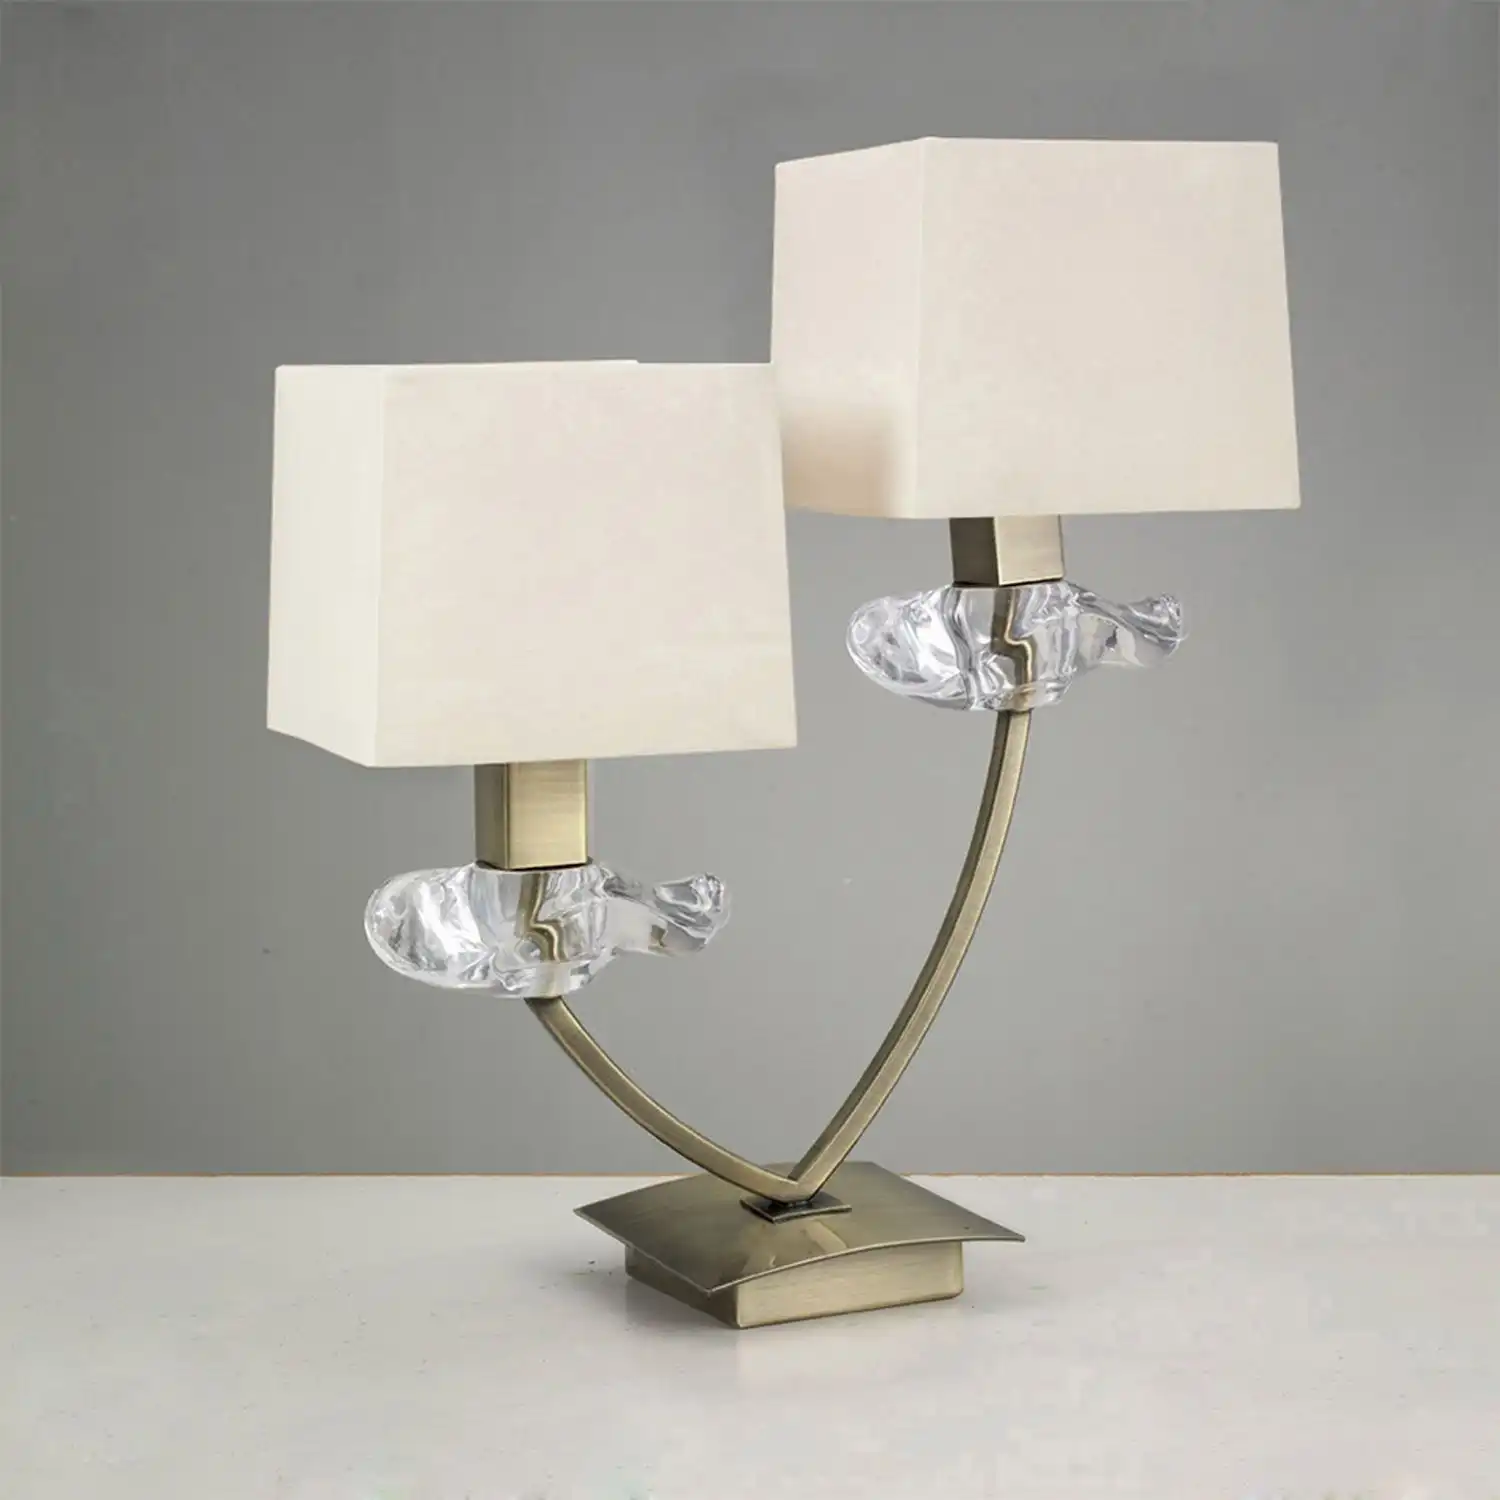 Akira Table Lamp 2 Light E14, Antique Brass With Cream Shades